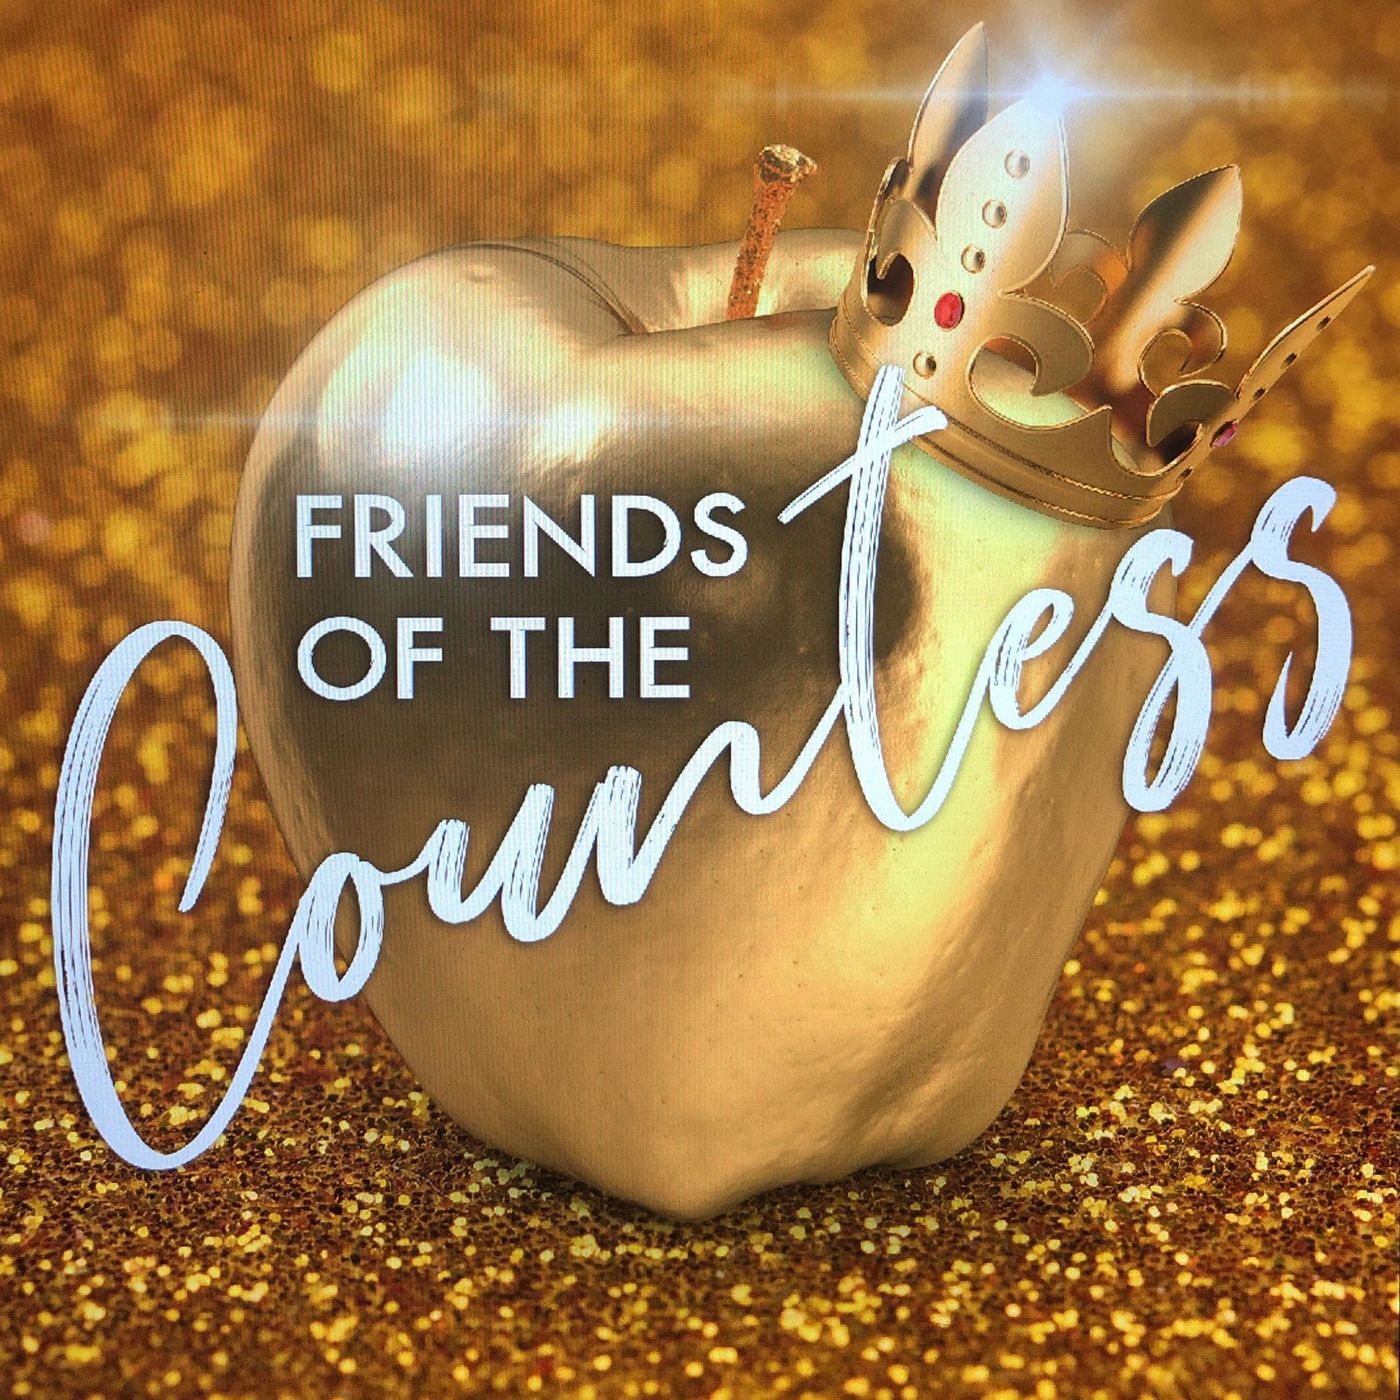 Friends of the Countess